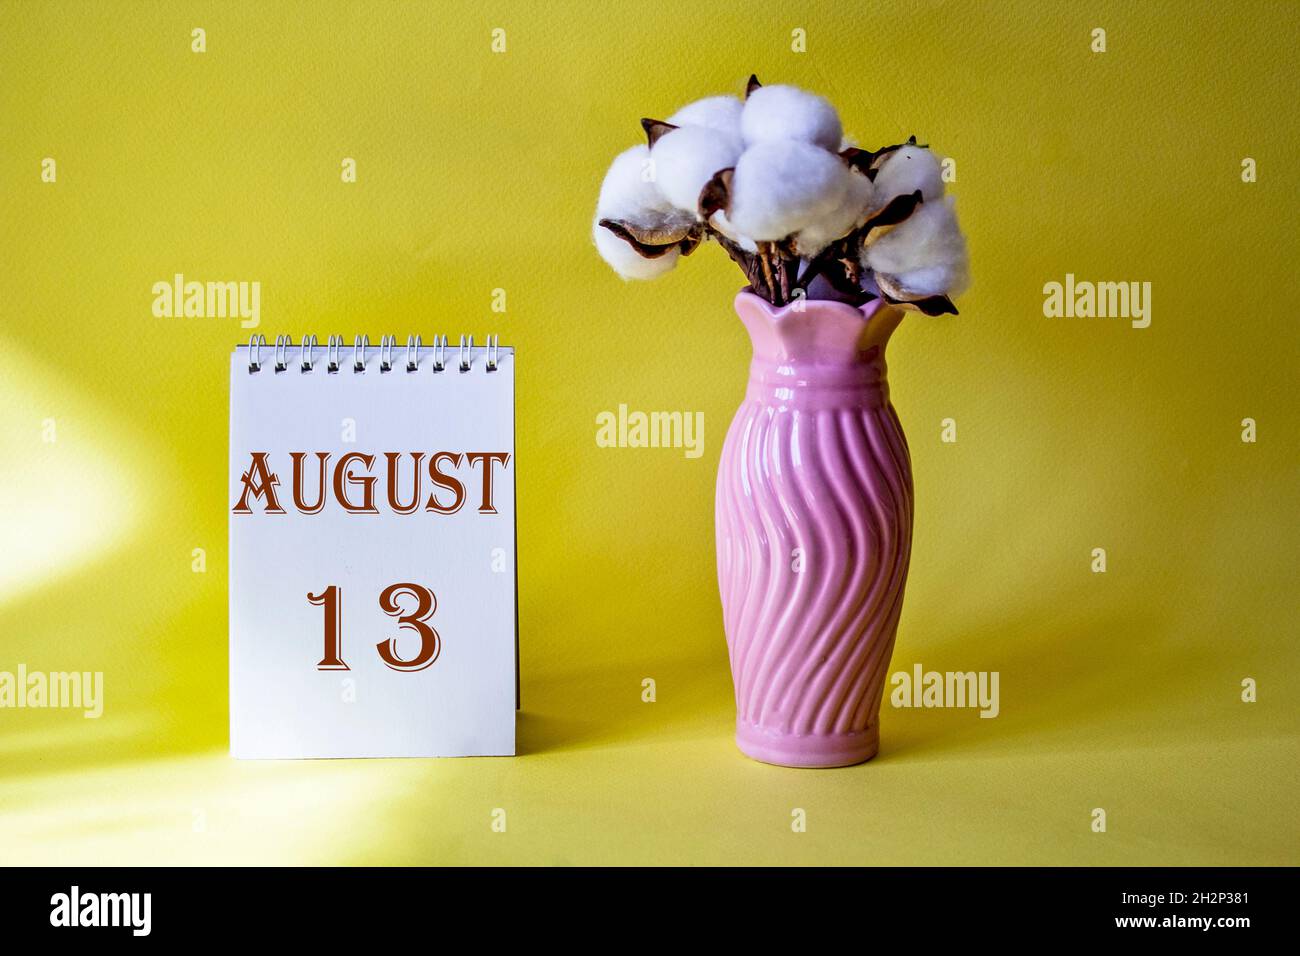 Calendar with text 13 august on yellow background and with a vase of flowers Stock Photo